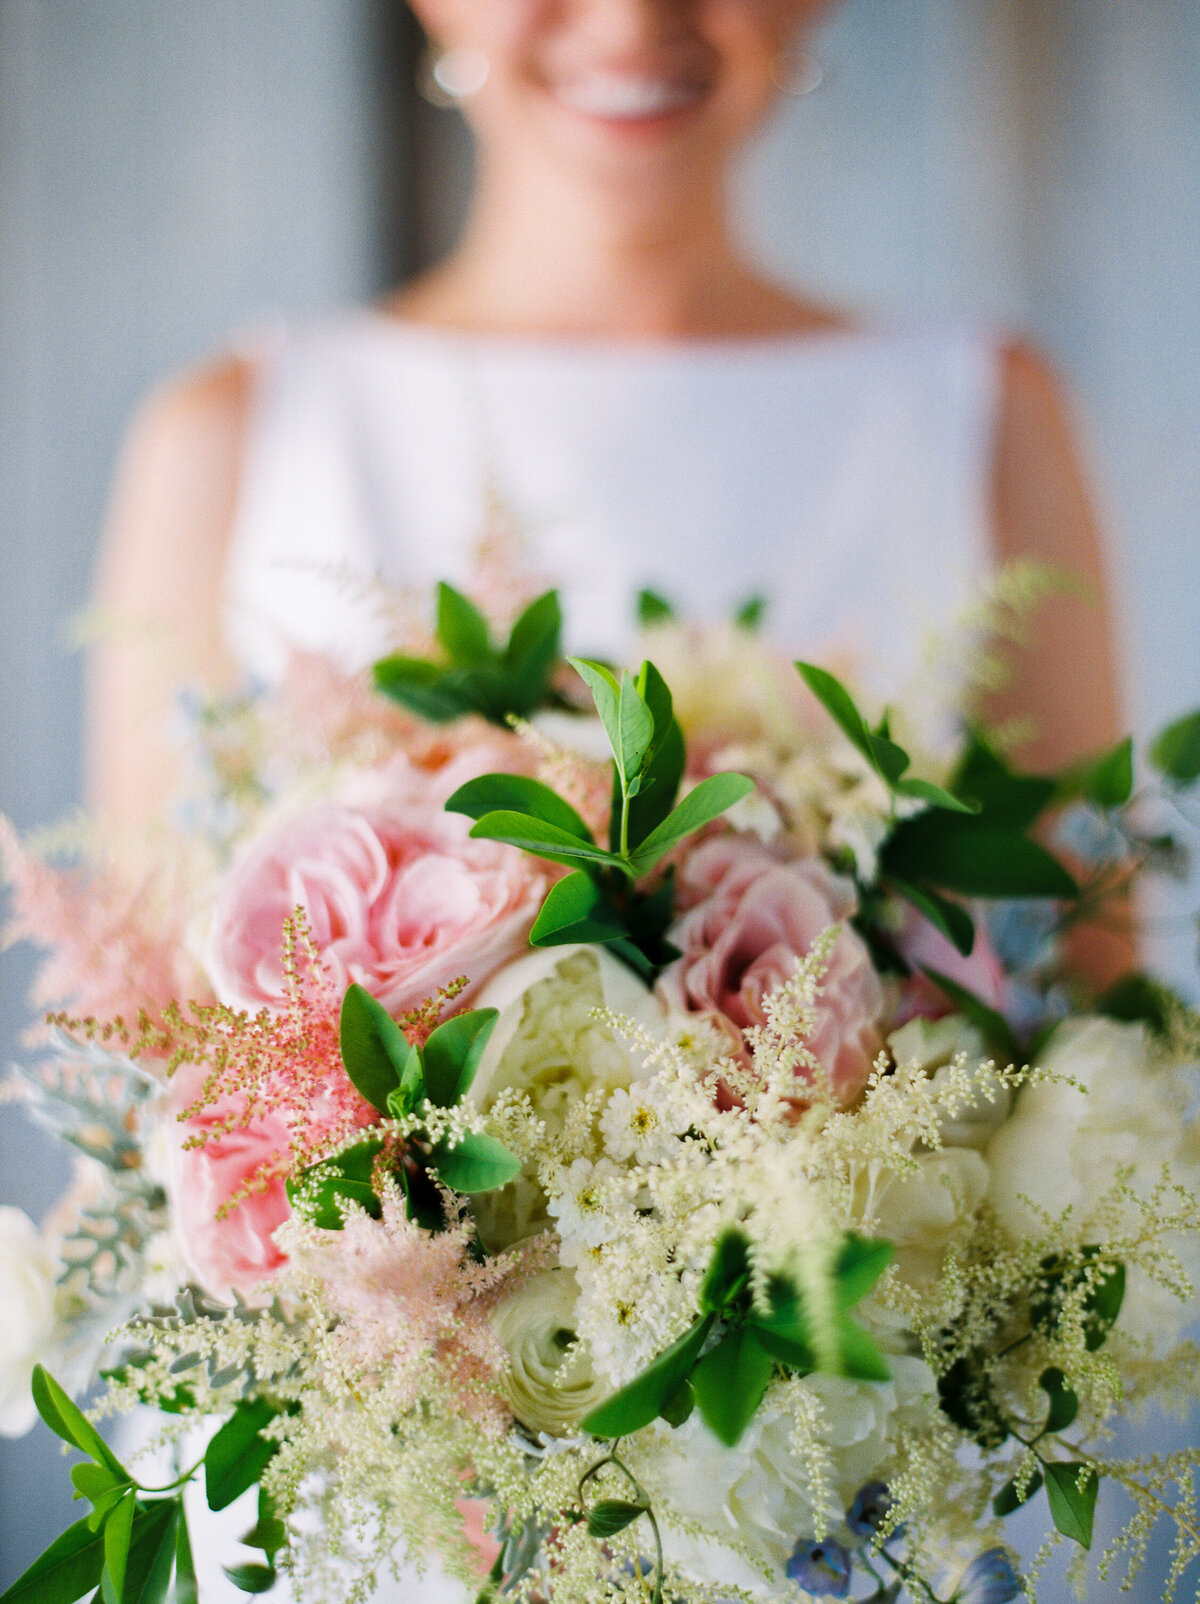 Close-up of bride's pink, white and green bouquet